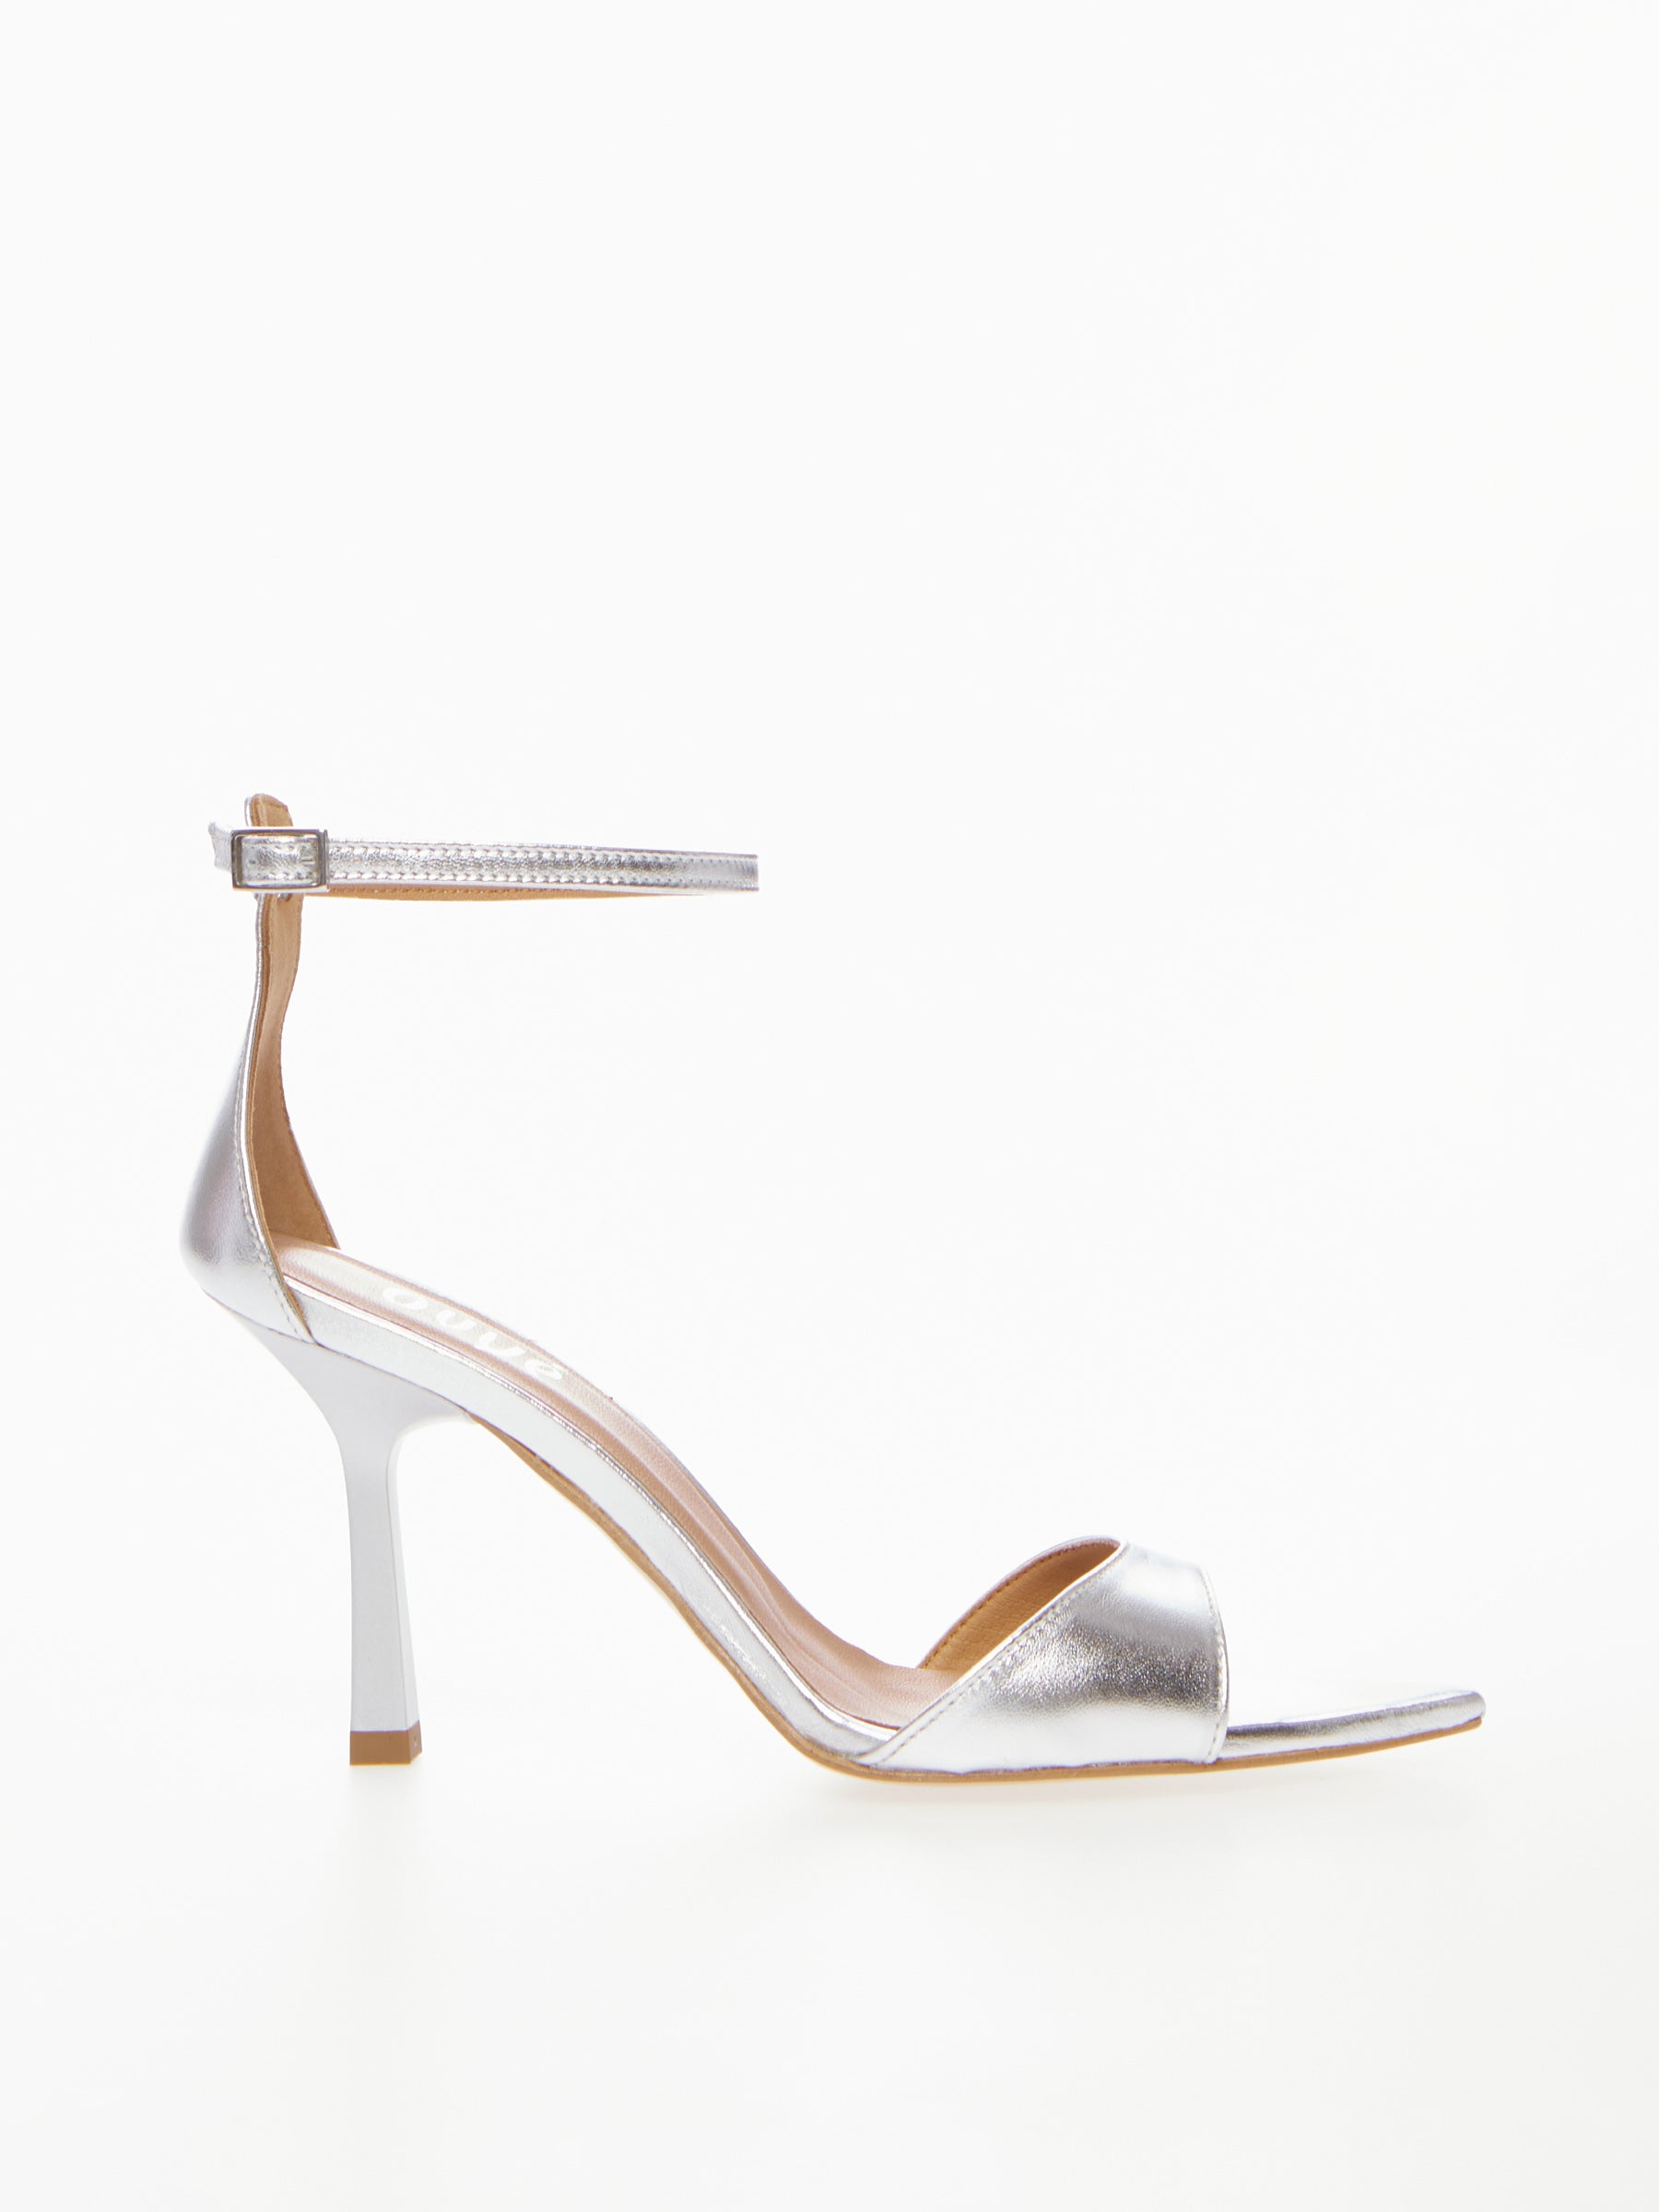 Ovyé - Pointed sandal in laminated leather with ankle strap